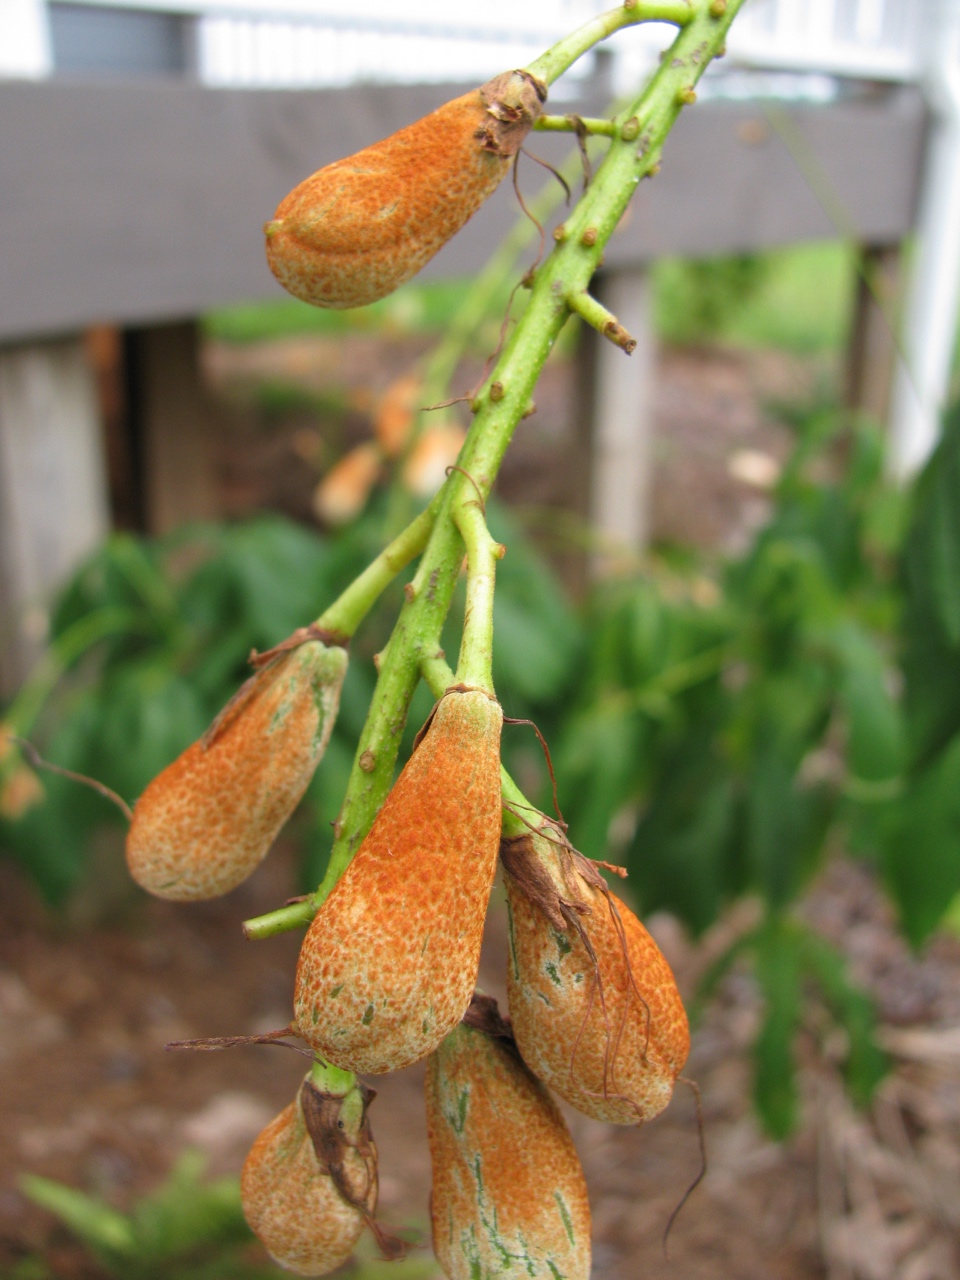 The Scientific Name is Aesculus parviflora. You will likely hear them called Bottlebrush Buckeye. This picture shows the Developing fruit at the end of July of Aesculus parviflora